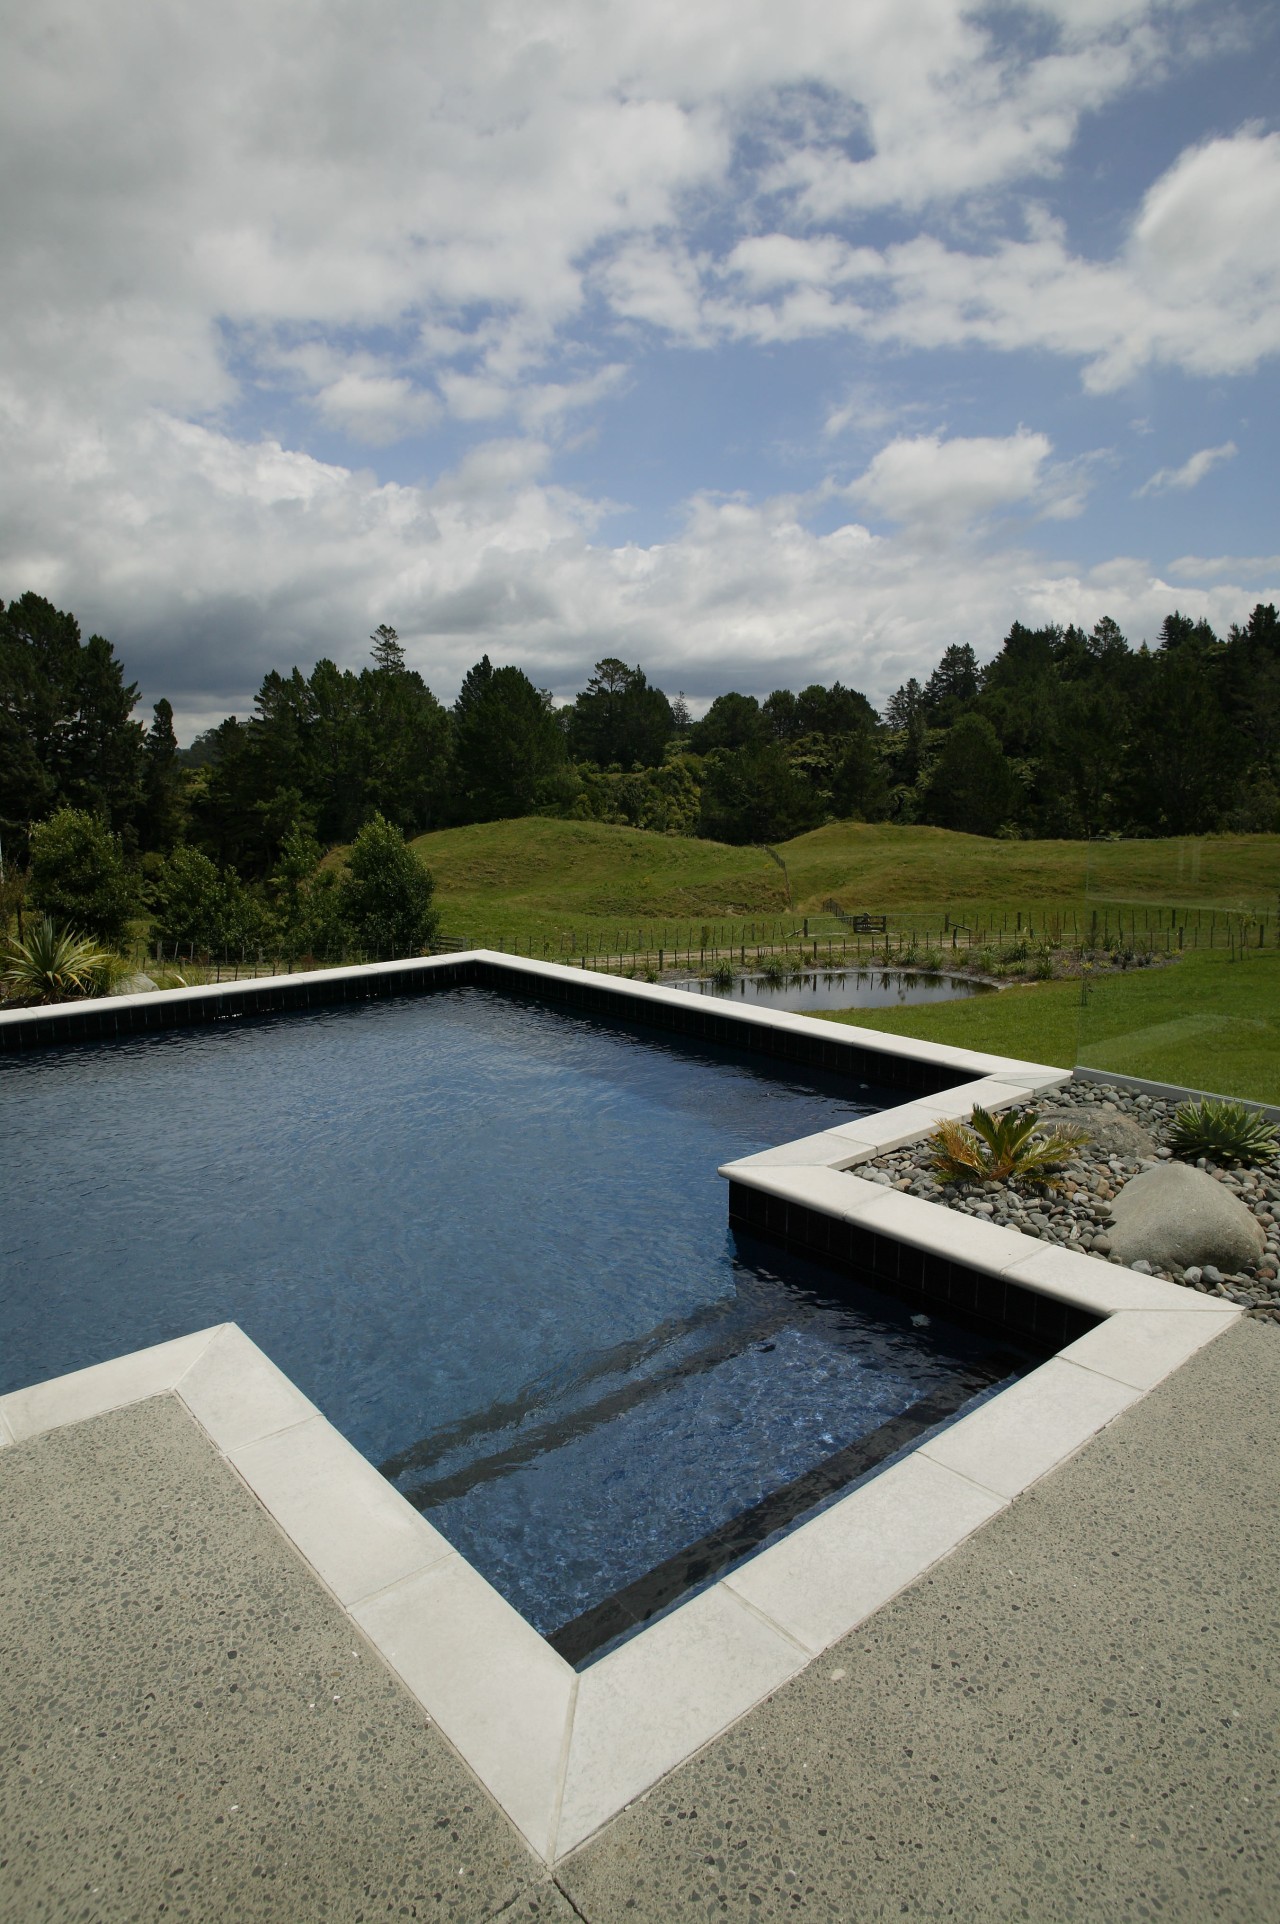 view of a pool by Pool Resources. cloud, estate, grass, landscape, leisure, real estate, reflecting pool, reflection, reservoir, sky, swimming pool, water, water feature, water resources, gray